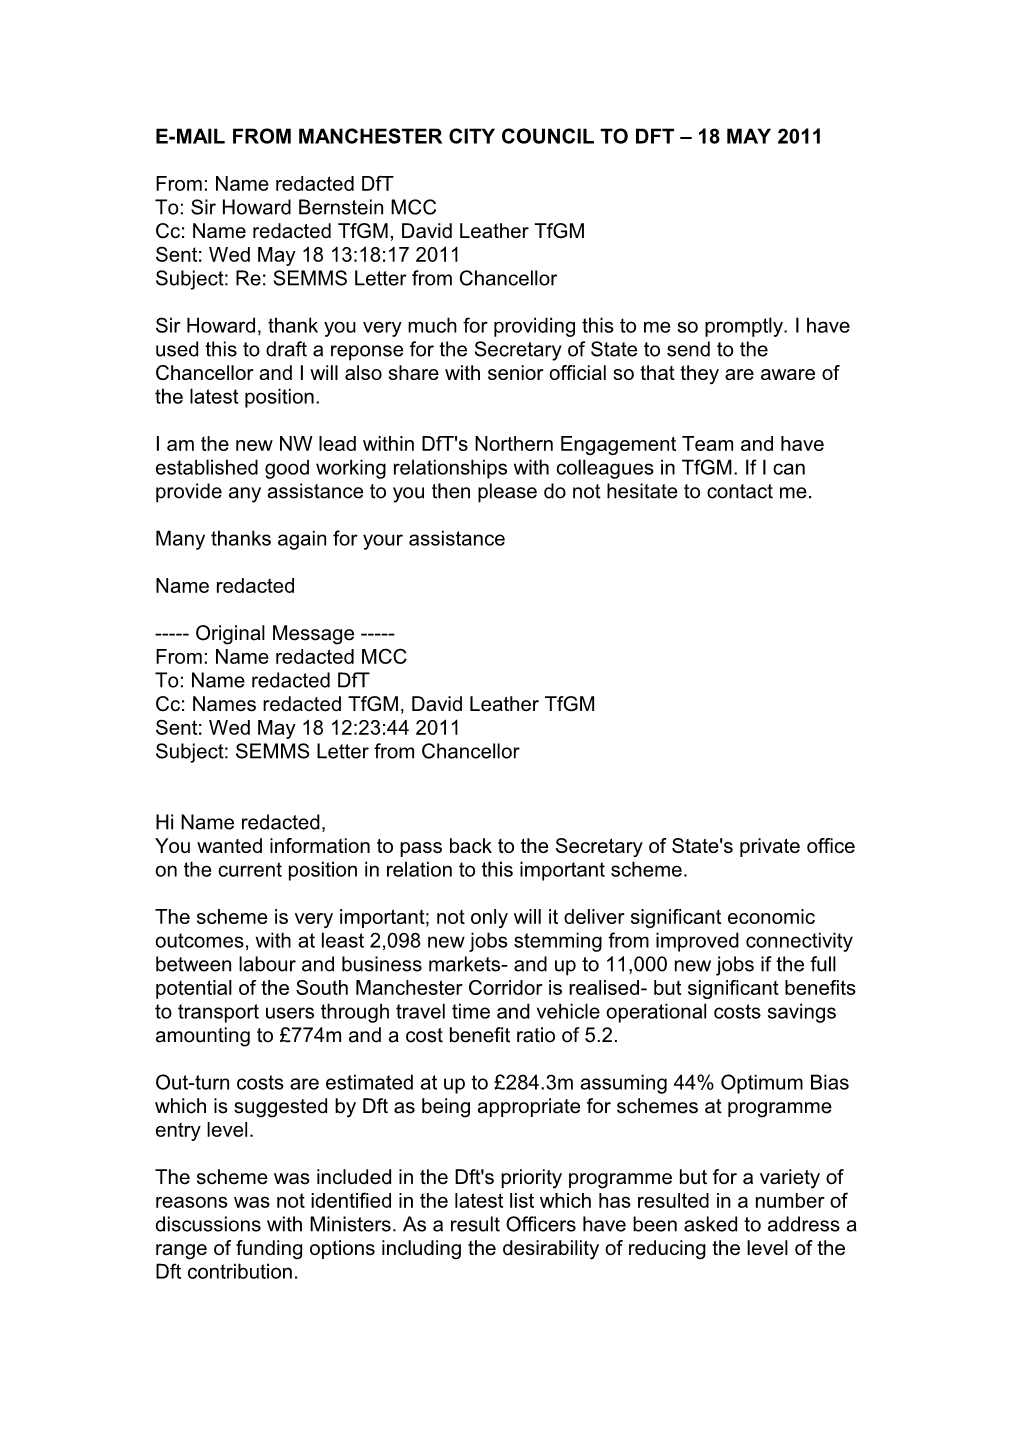 E-Mail from Manchester City Council to Dft 18 May 2011